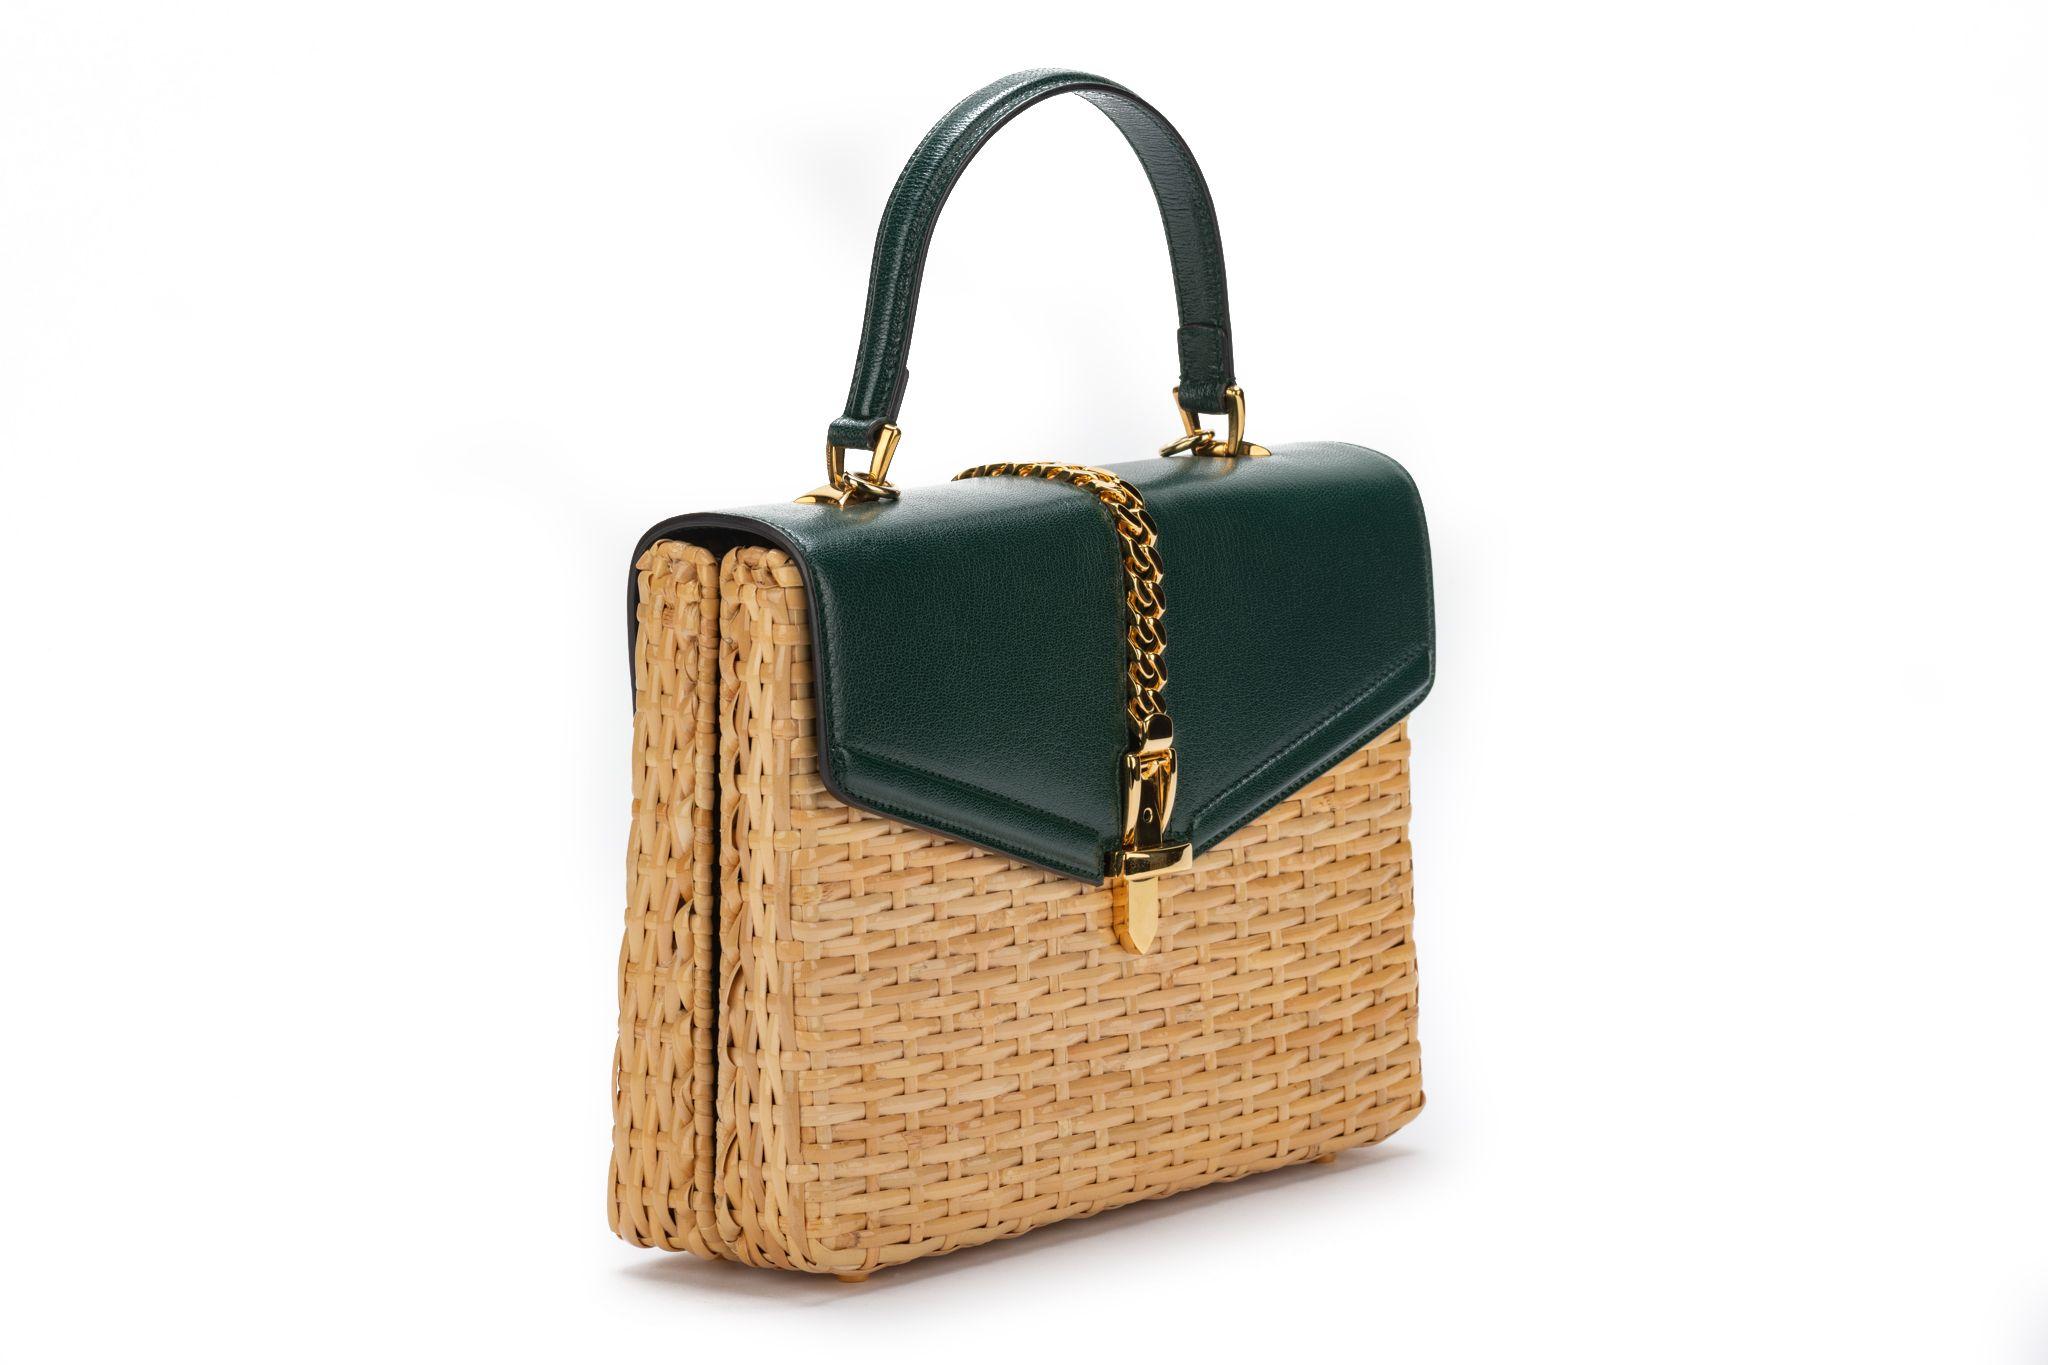 Gucci Green Leather Wicker Sylvie Shoulder Bag. Shoulder strap detachable and adjustable measures 21”, handle 4”. It's brand new and comes with booklets and original dustcover.